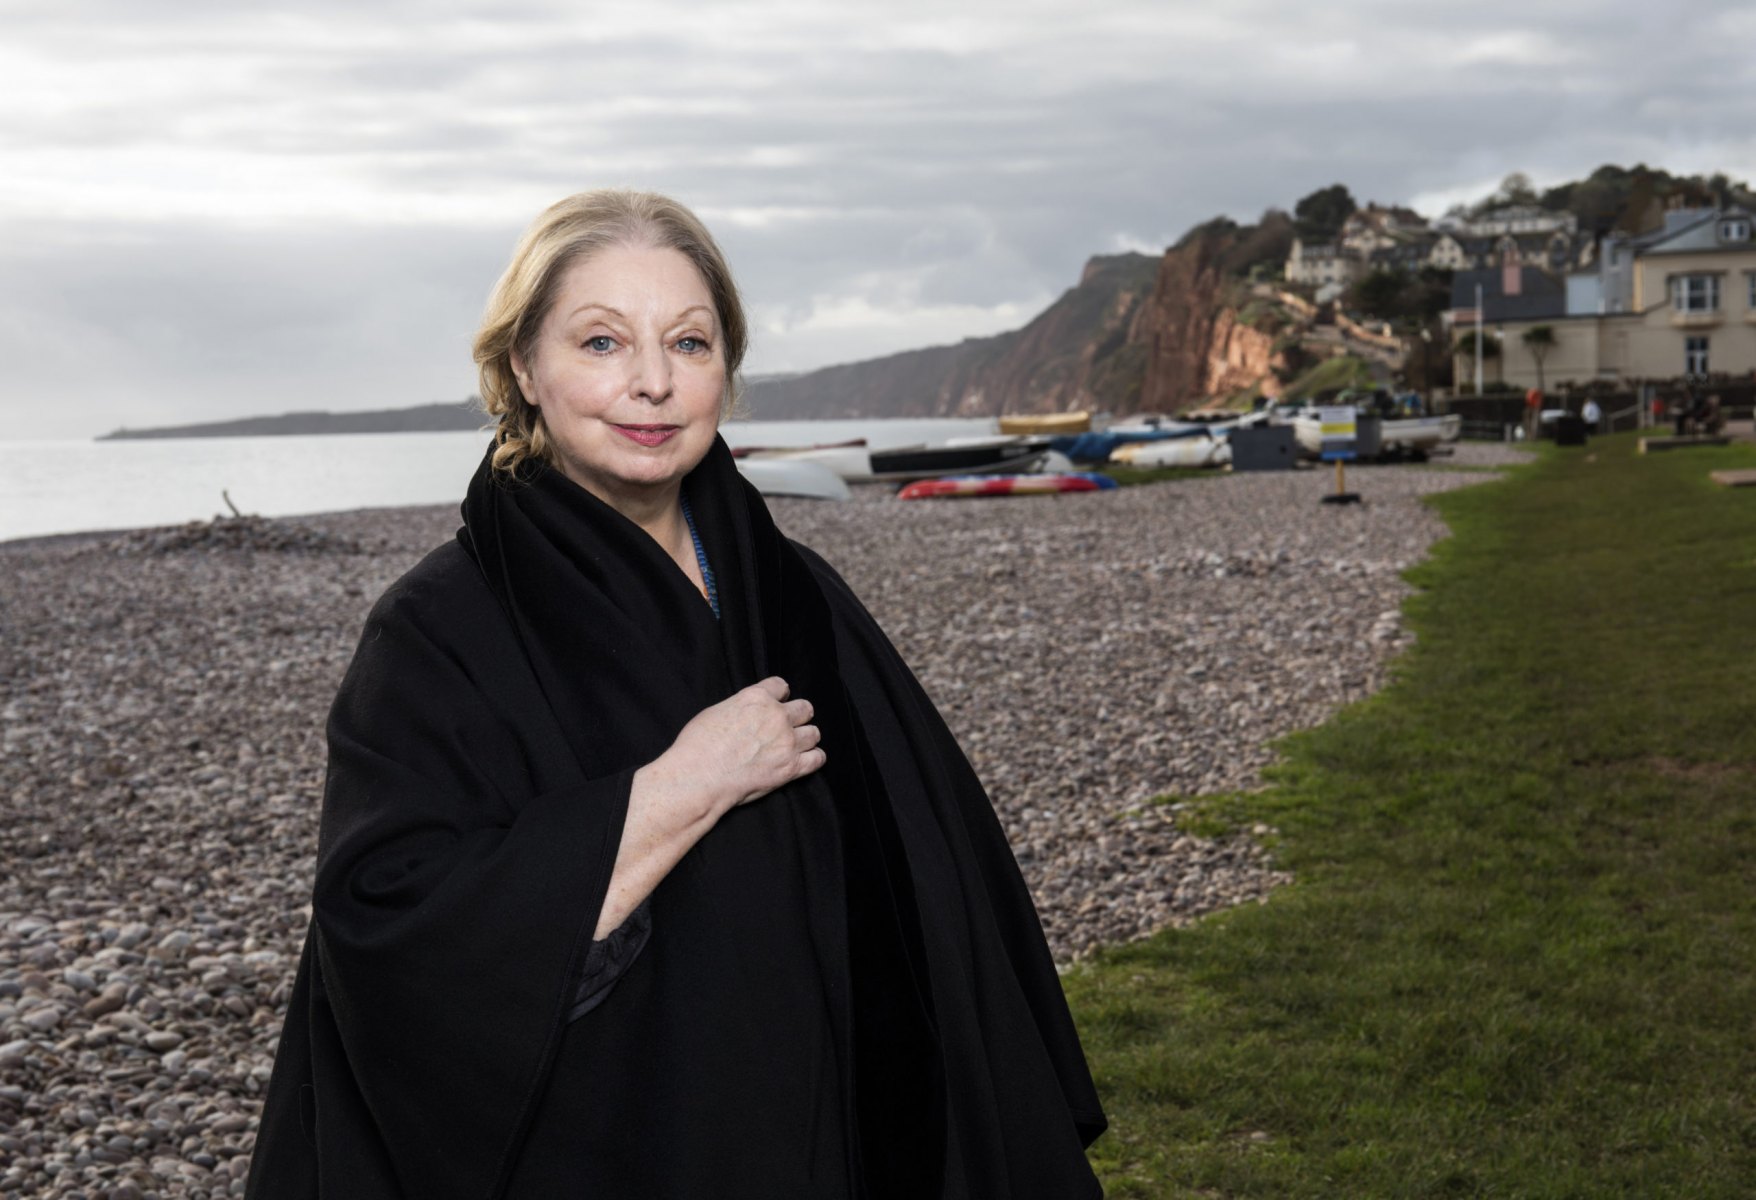 Author Hilary Mantel, Wolf Hall/ Cromwell Trilogy. photographed at her home and on the beach in Buckleigh Salterton, Devon, United Kingdom